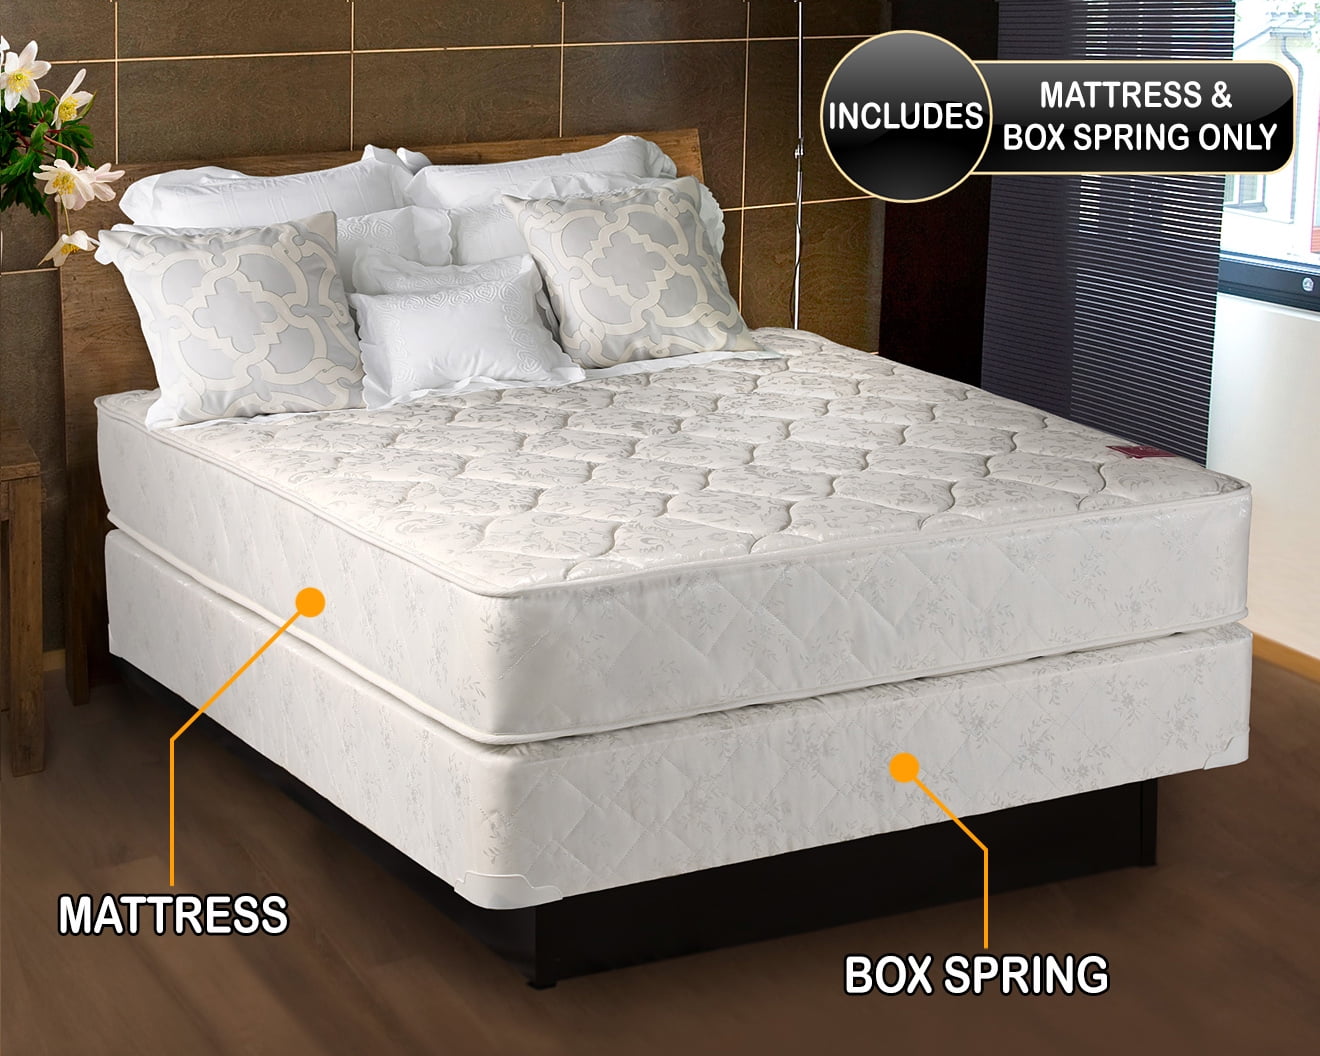 box springs to go under king mattress